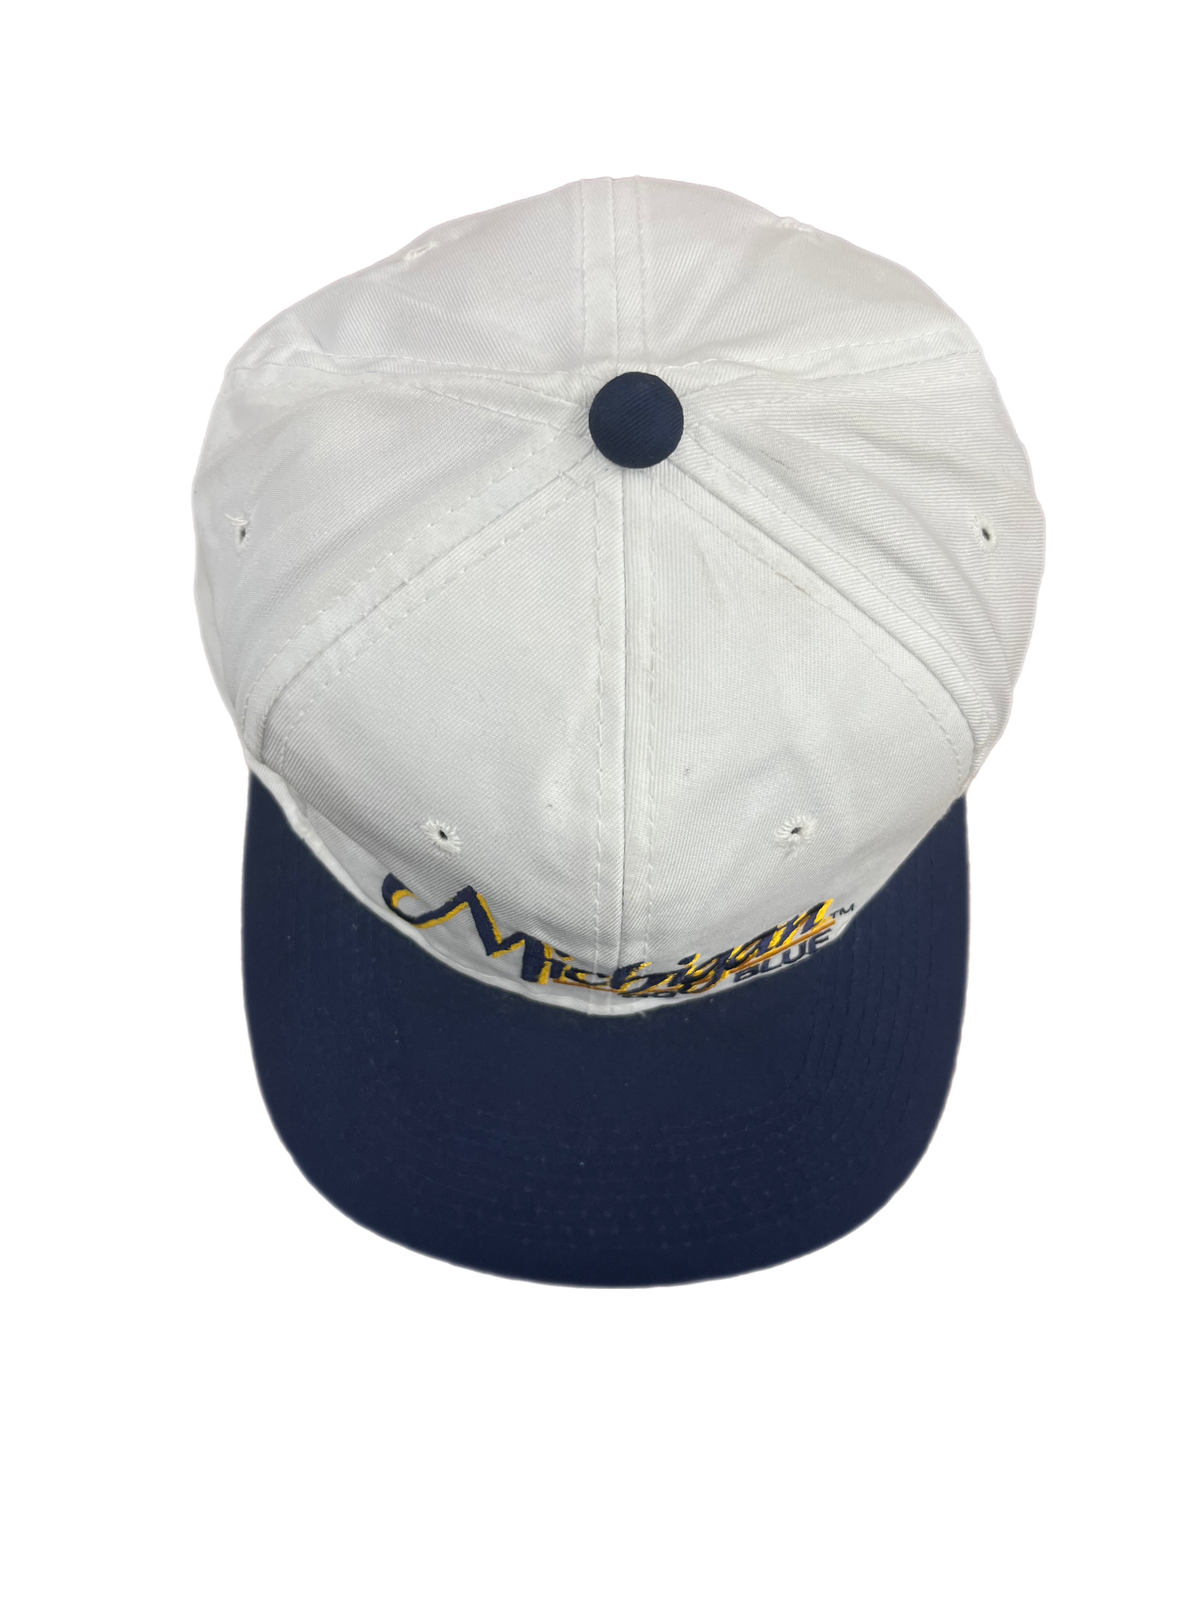 Vintage University Of Michigan &quot;Wolverines&quot; Go Blue The Game Snapback Hat